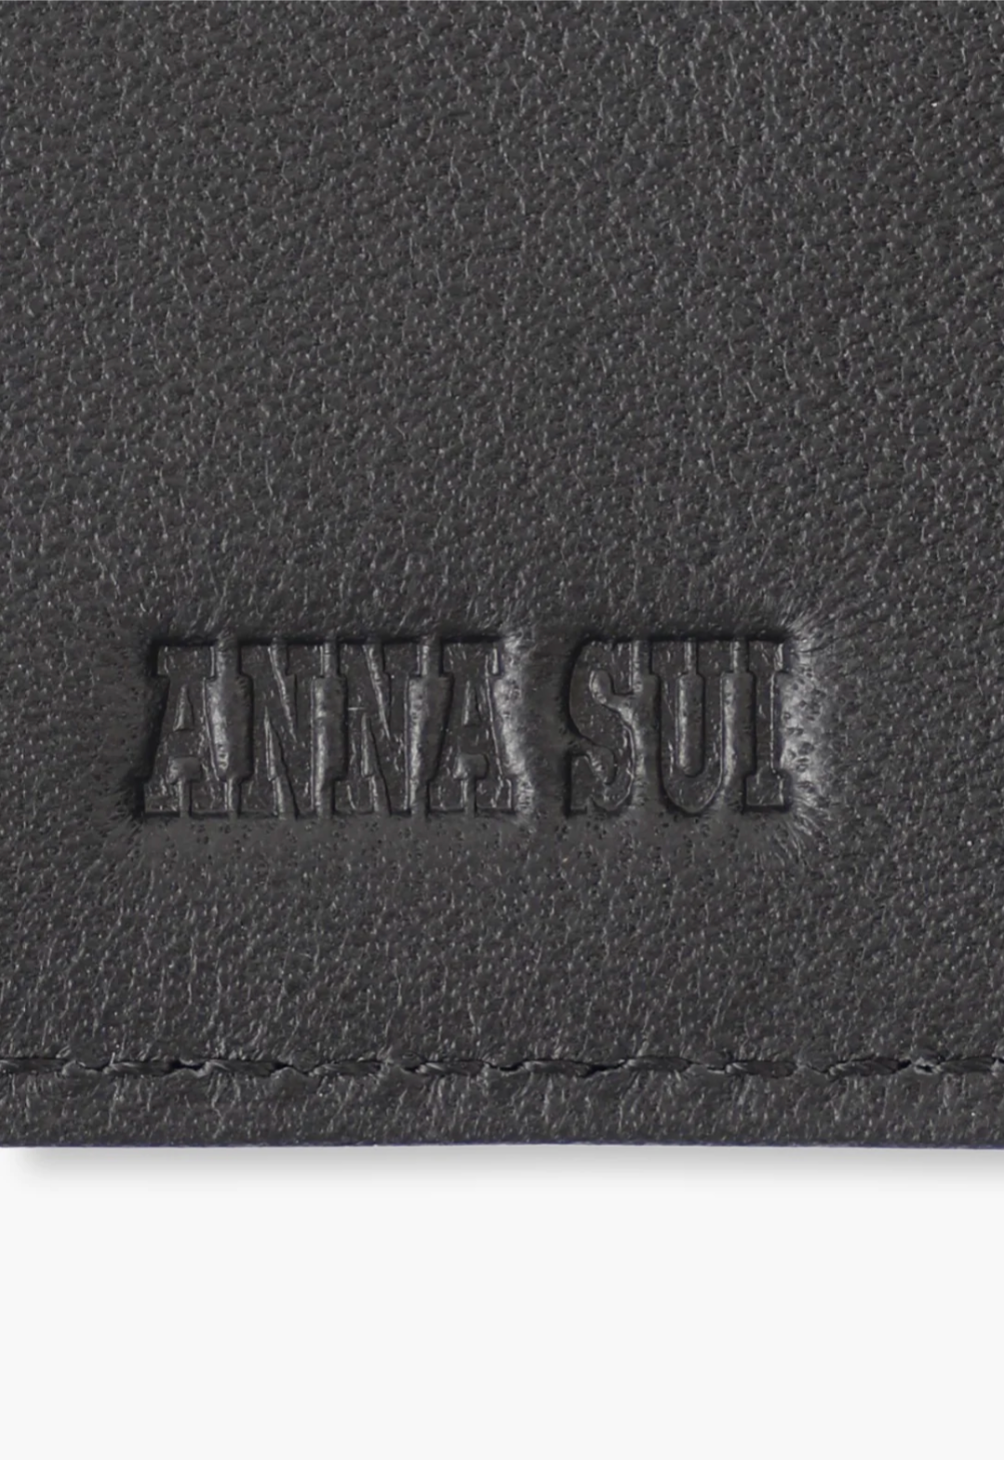 Small Roger Wallet black, detail of the Anna Sui Raised logo and large black stiches